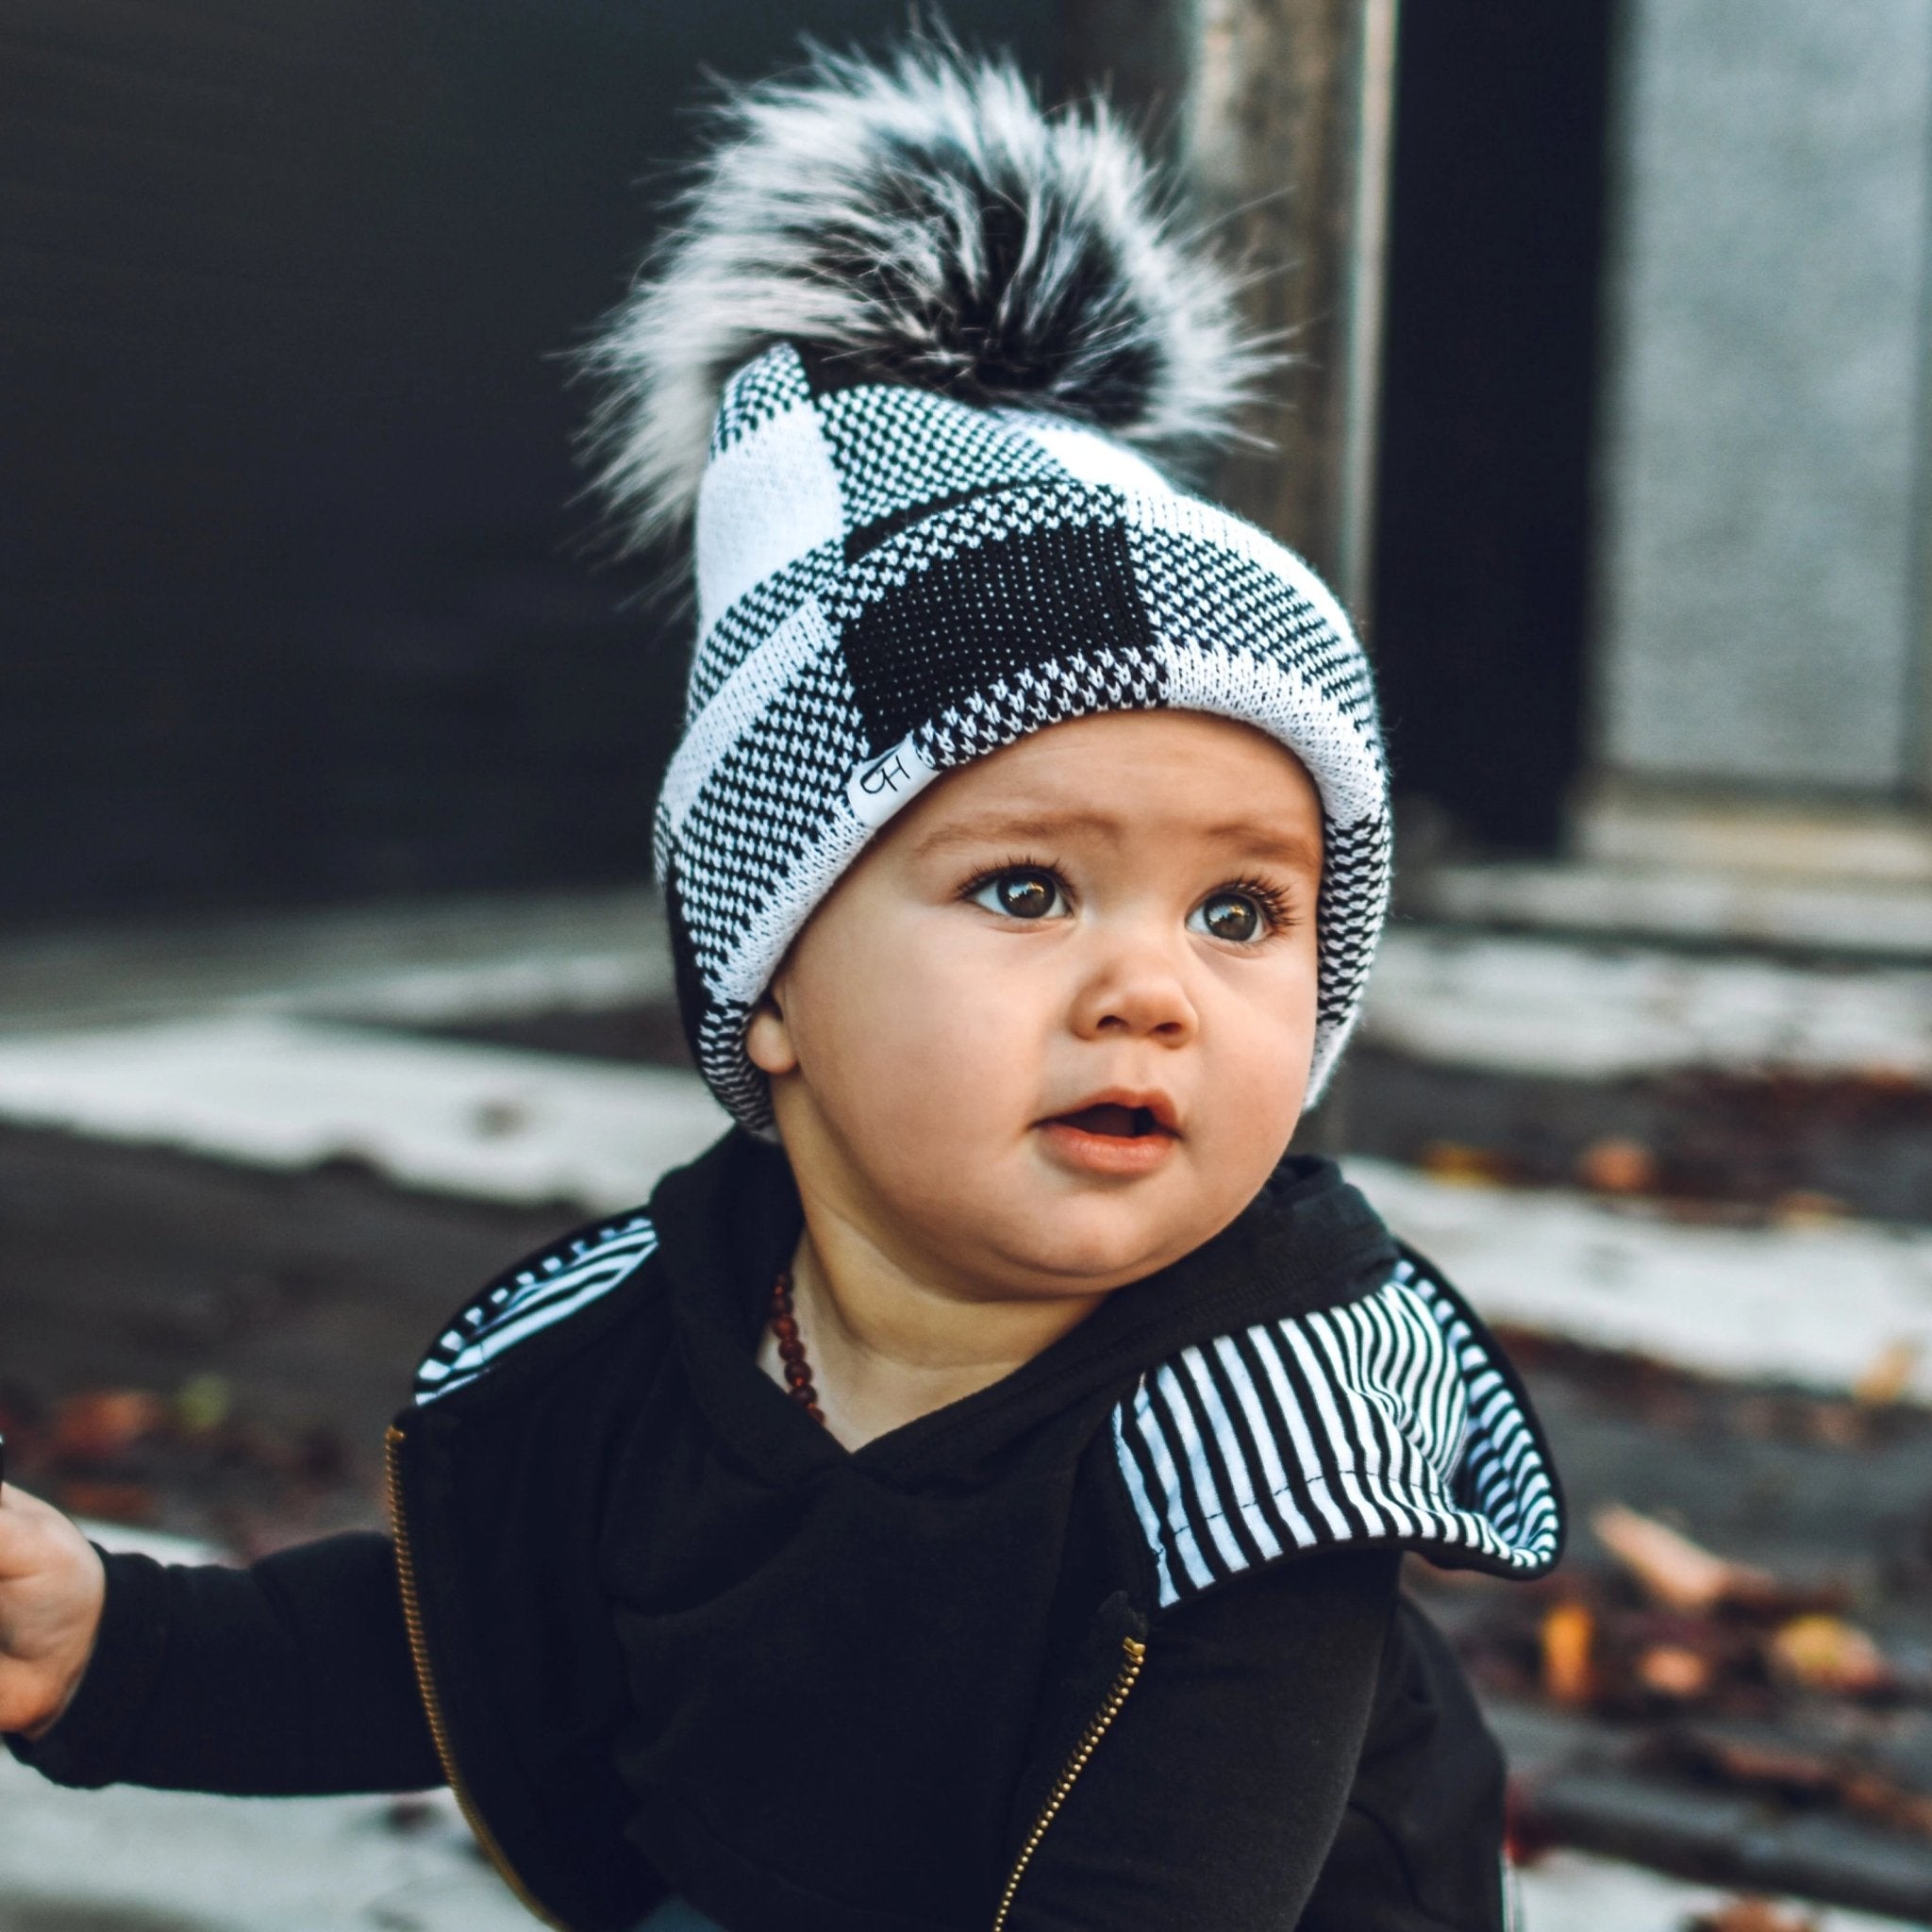 Image of a baby wearing the Black and White Plaid Beanie, a kid’s beanie from George Hats.